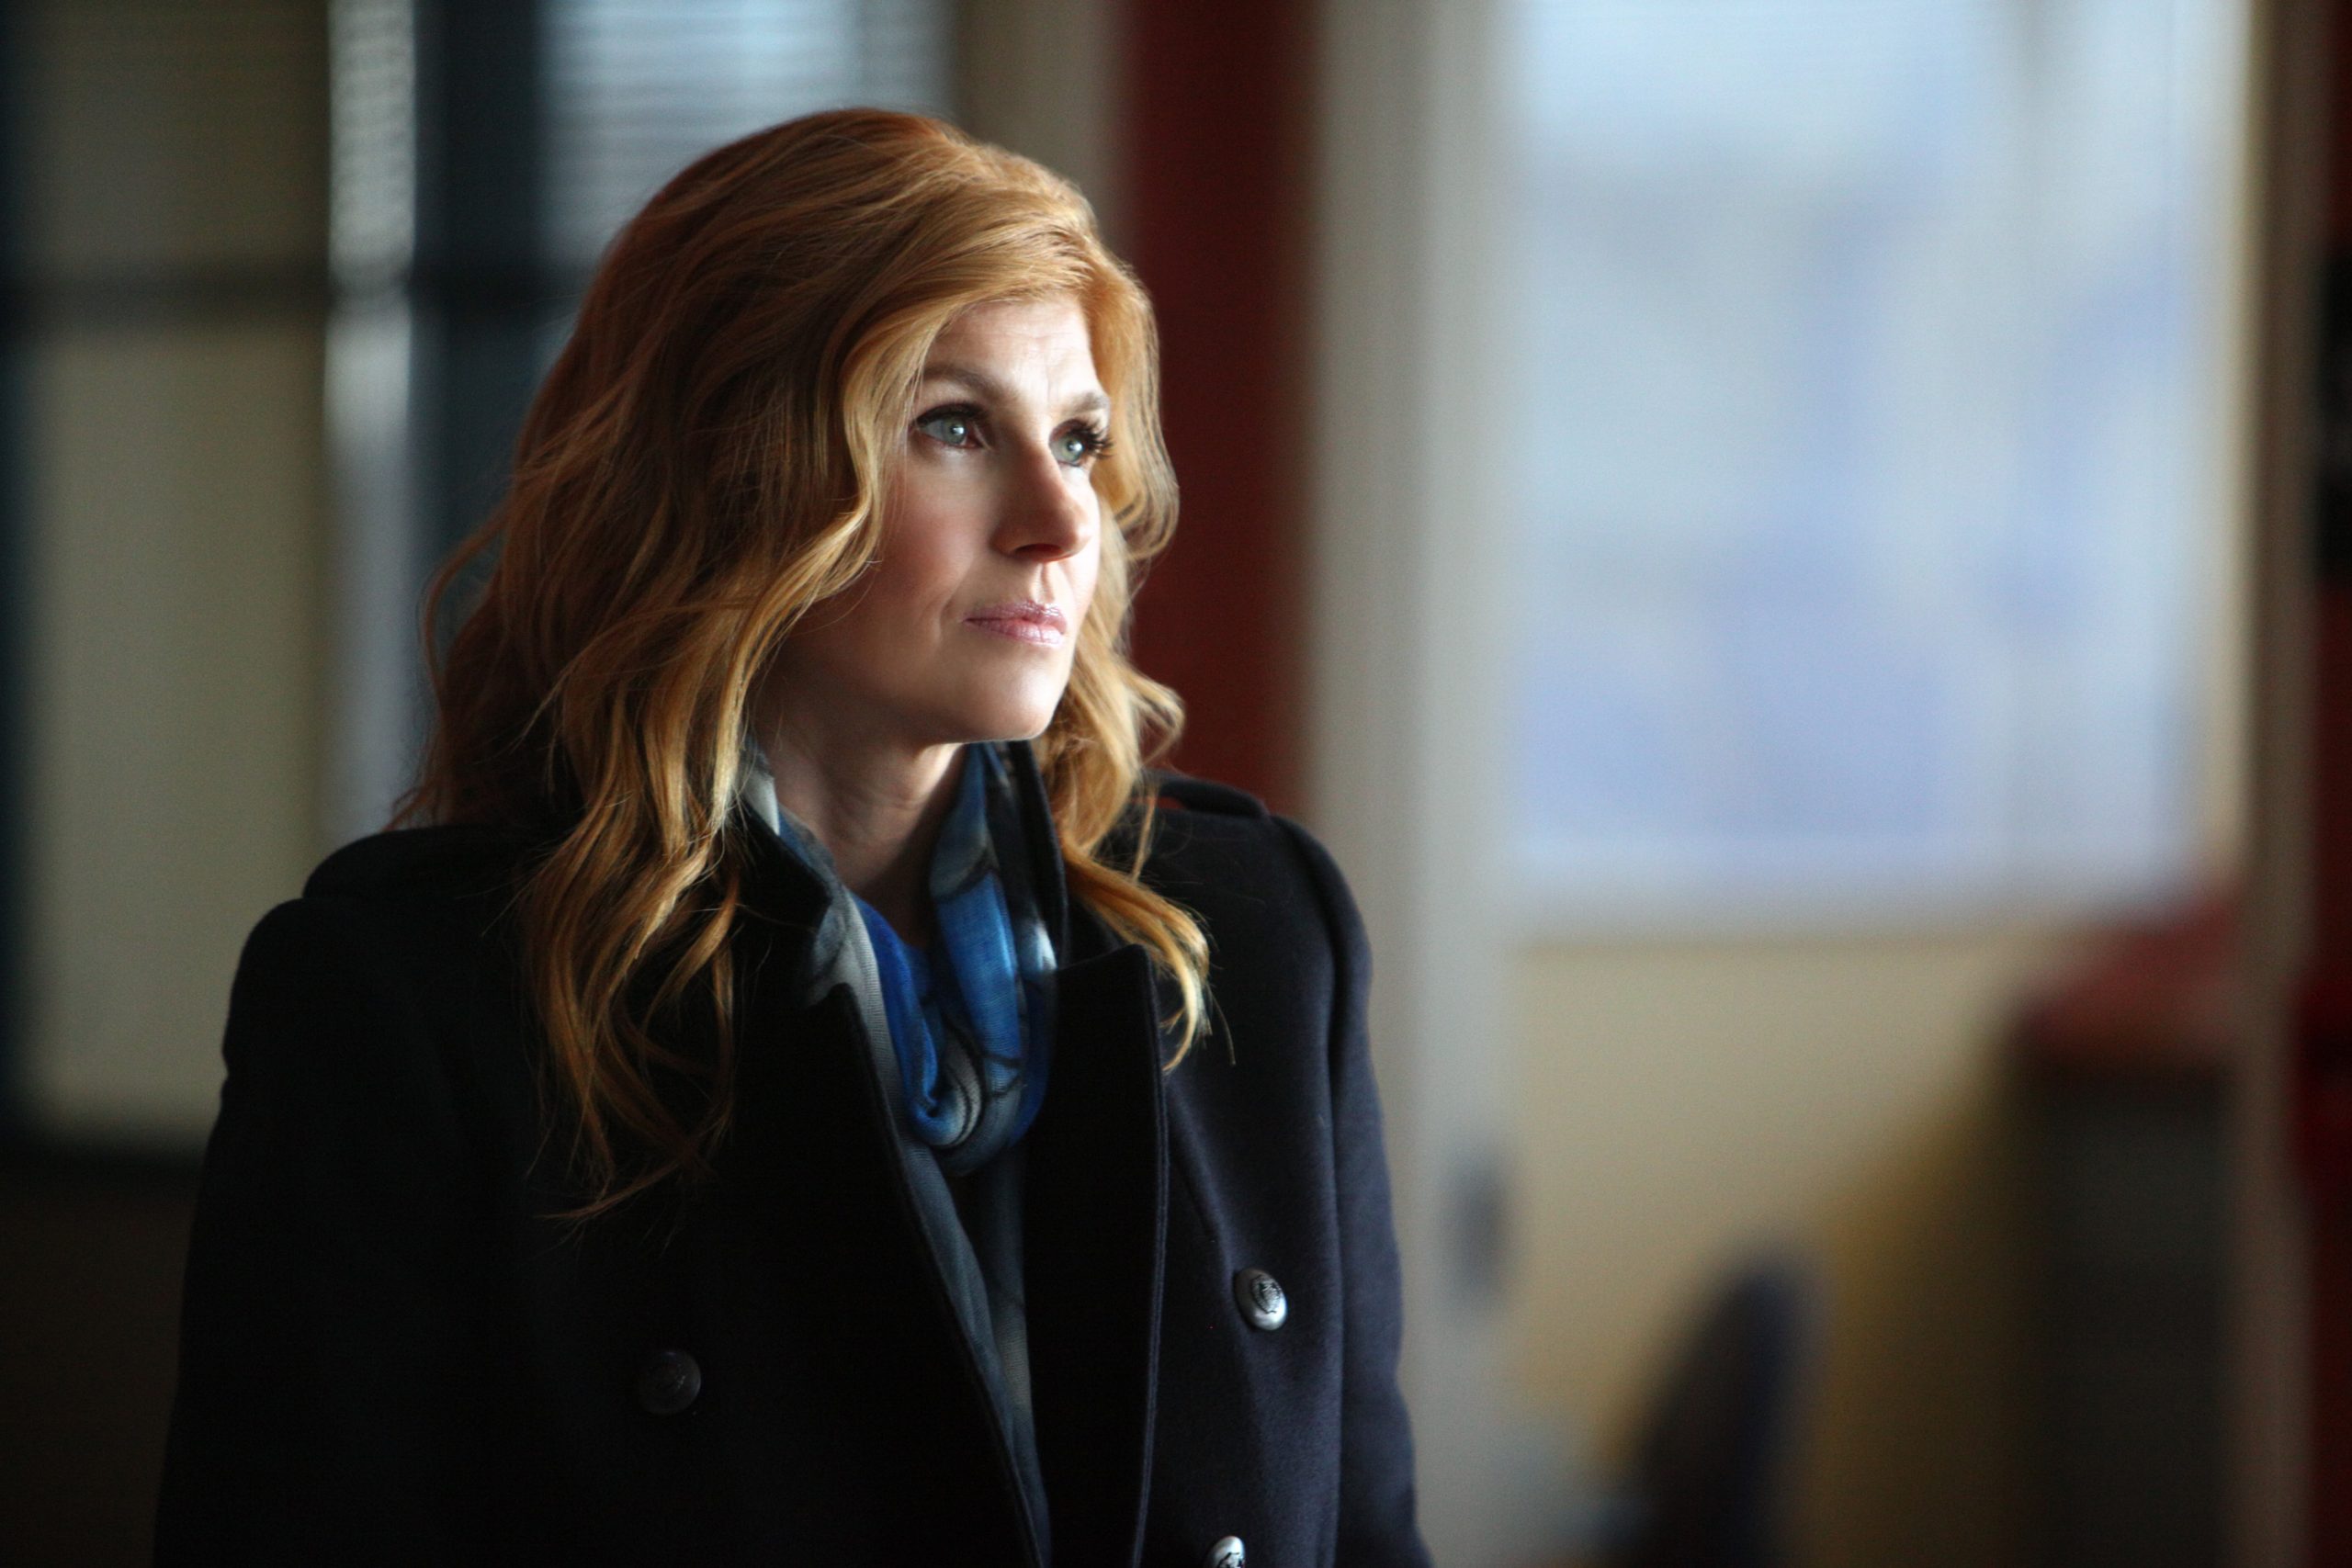 bill lakin recommends is connie britton a lesbian pic